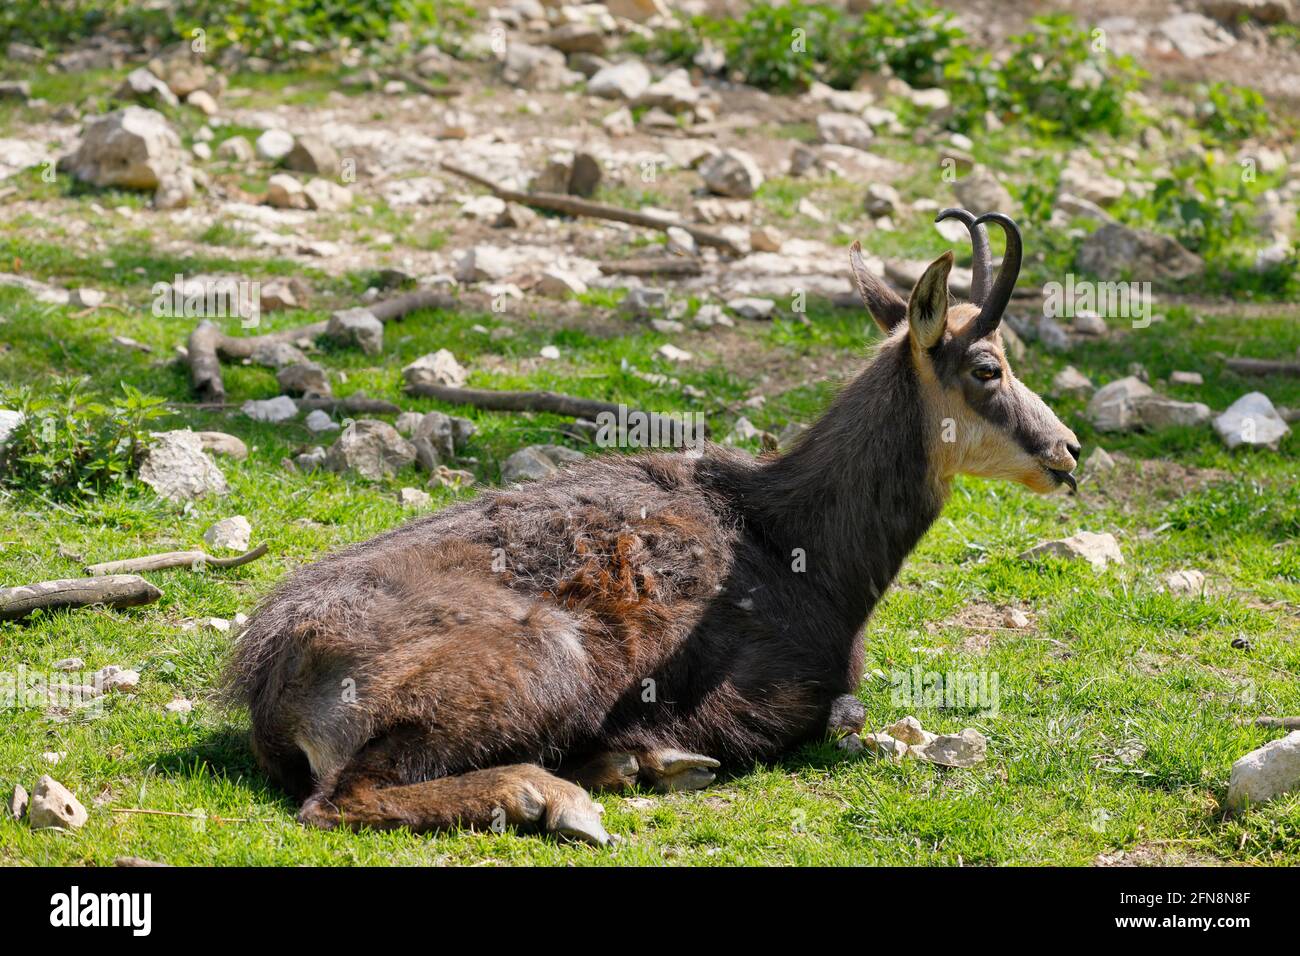 A Chamois, lying between stones in the grass Stock Photo